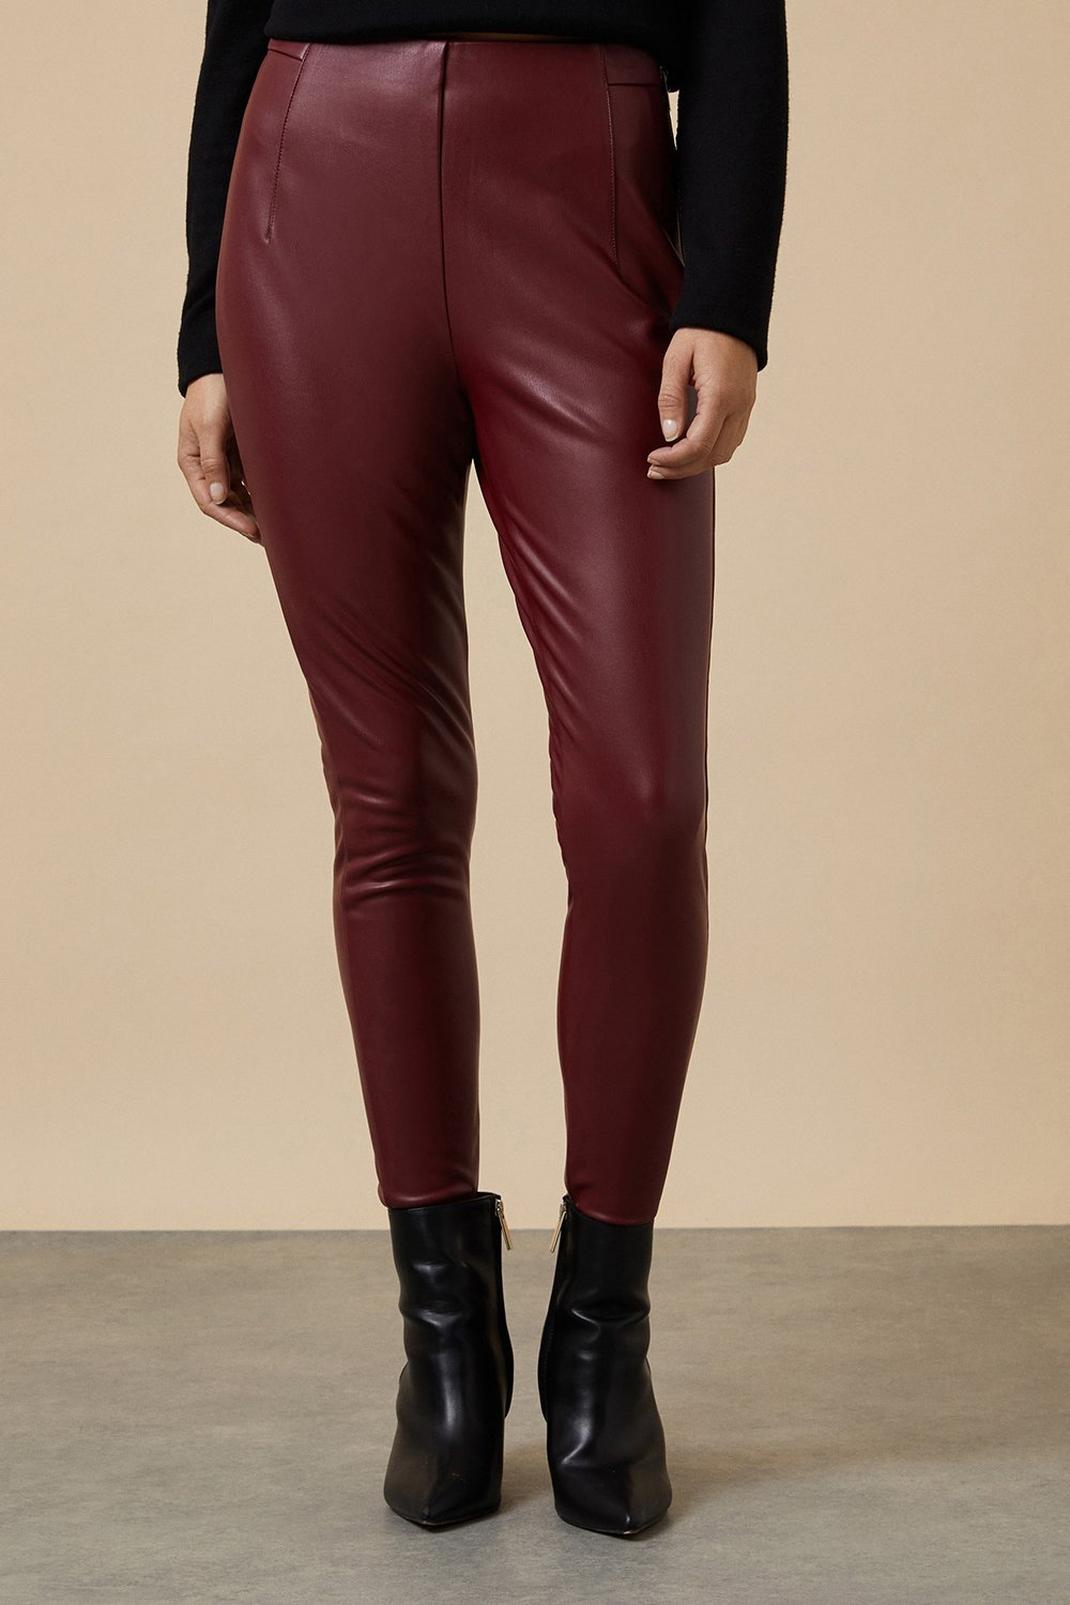 Berry Petite Faux Leather Leggings image number 1